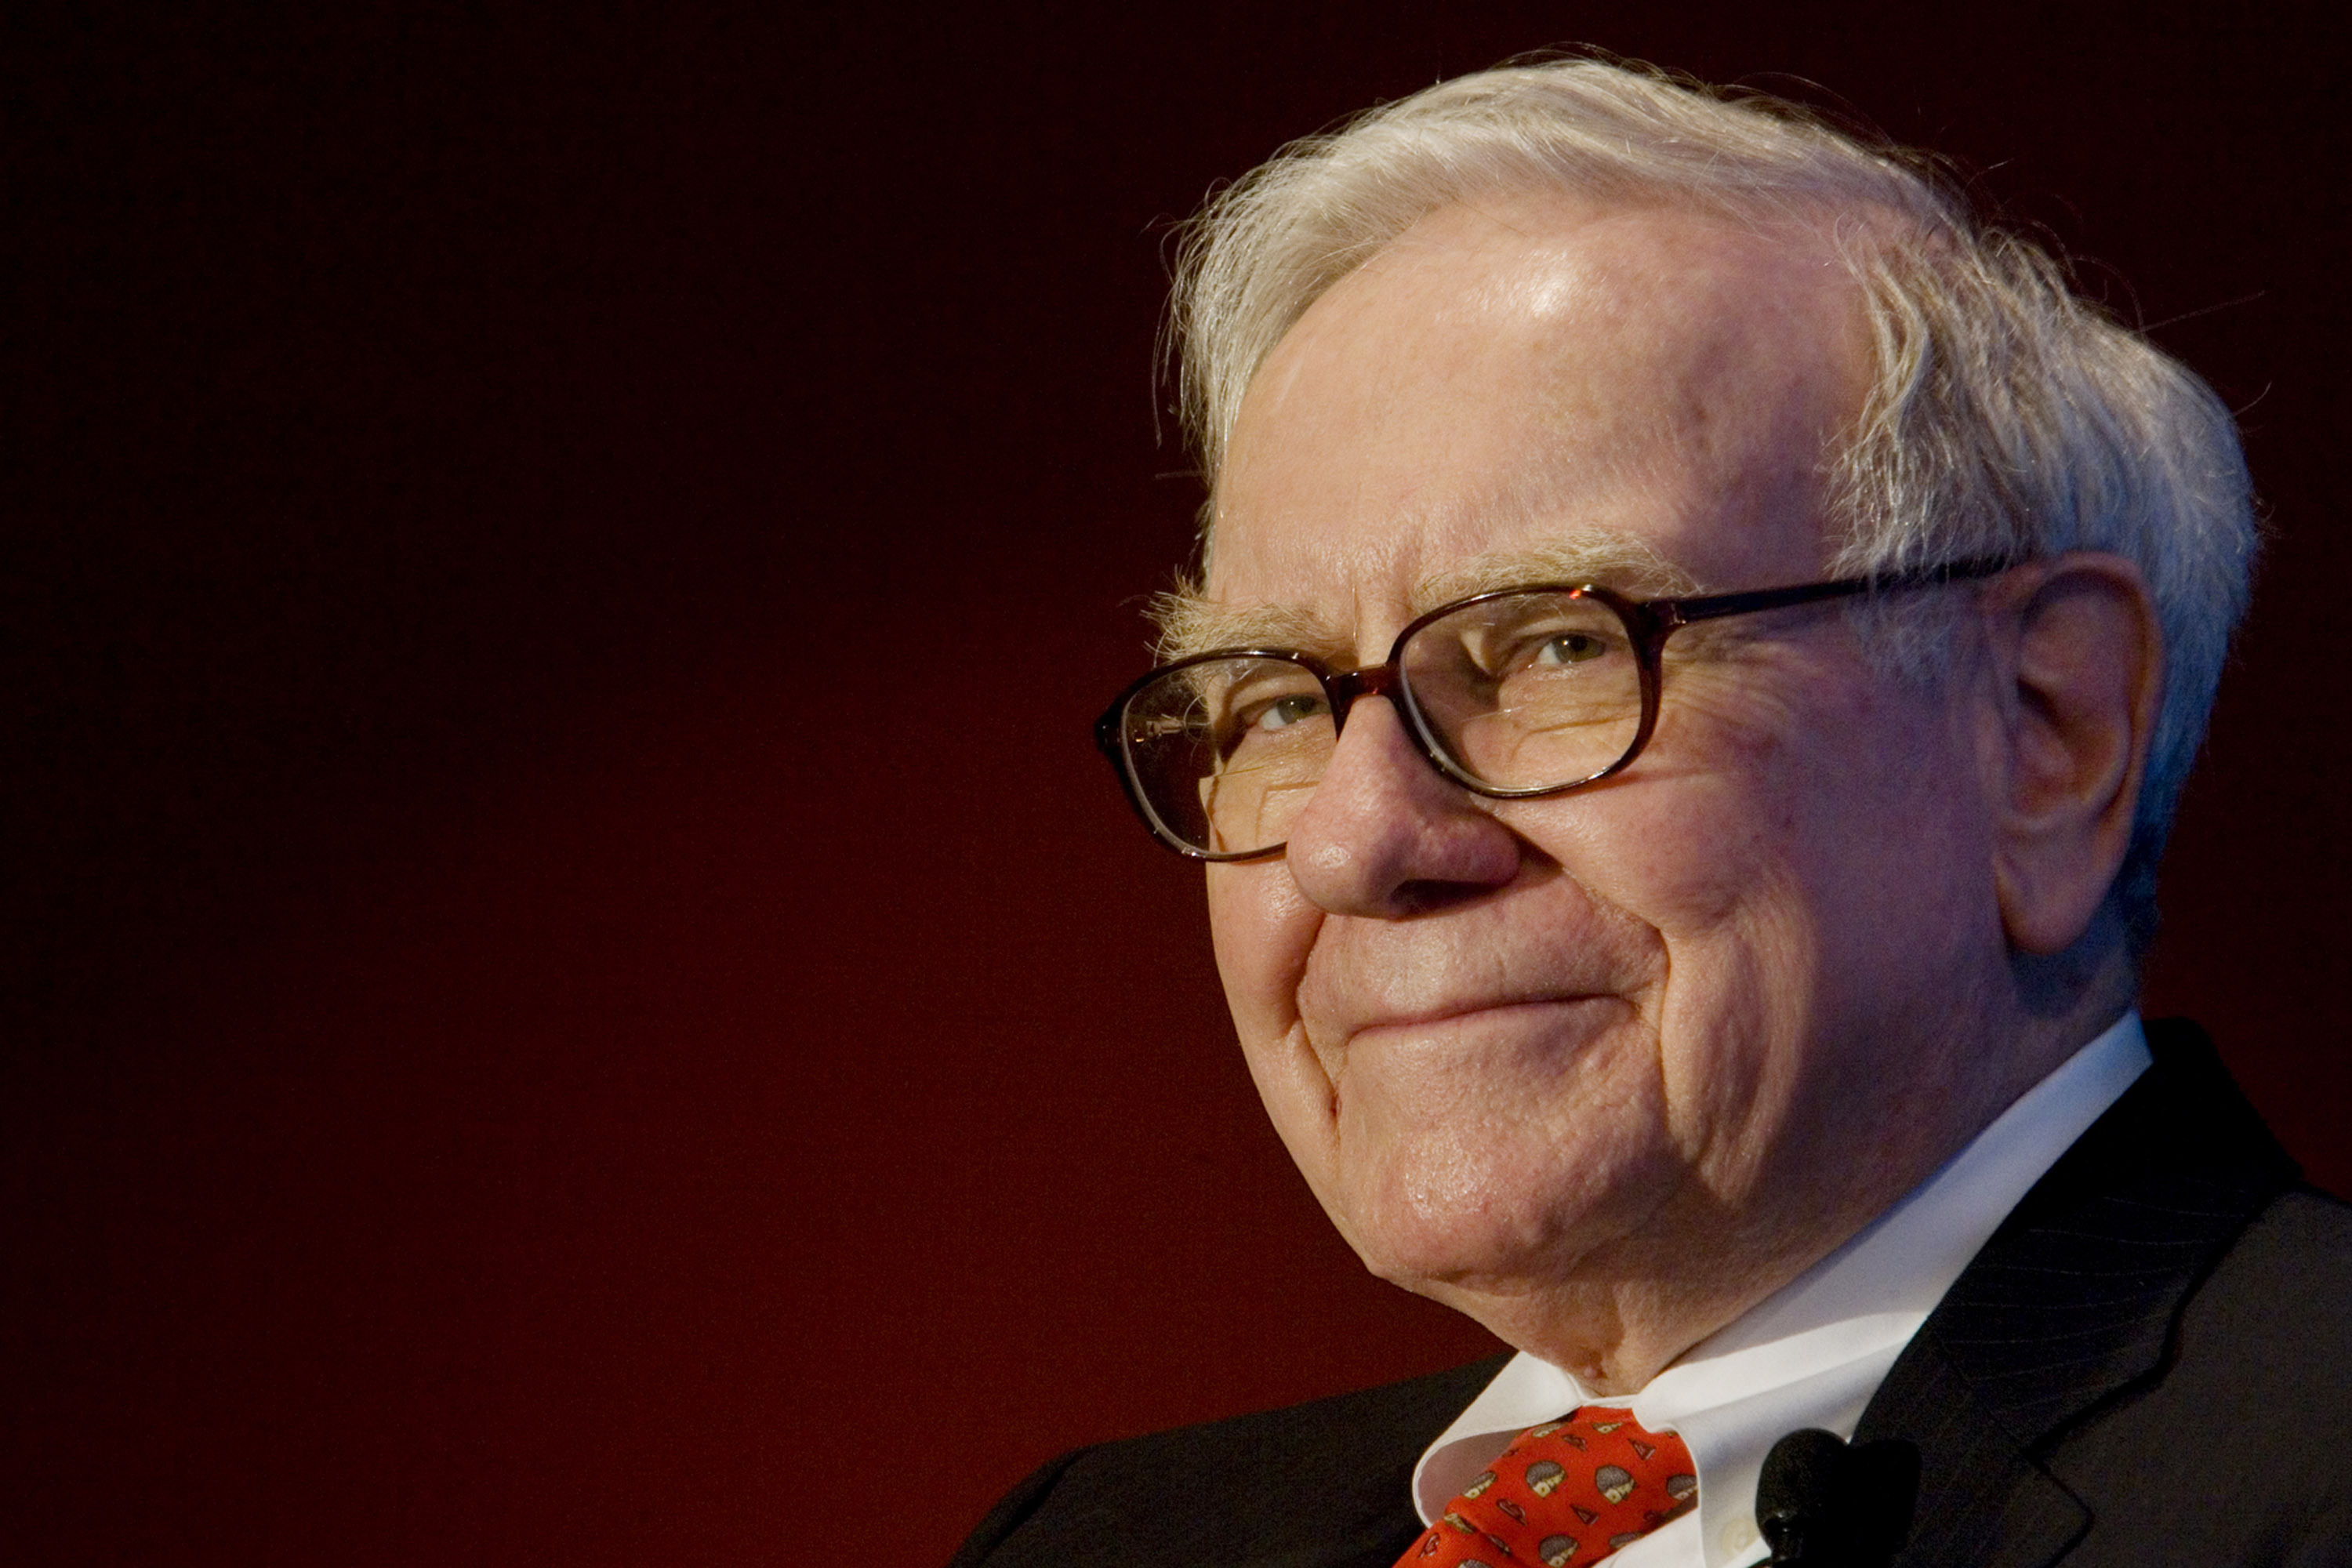 Warren Buffett's tax documents reveal that over the past several years he has donated several billion to pro-abortion agencies, including Planned Parenthood and the National Abortion Federation.